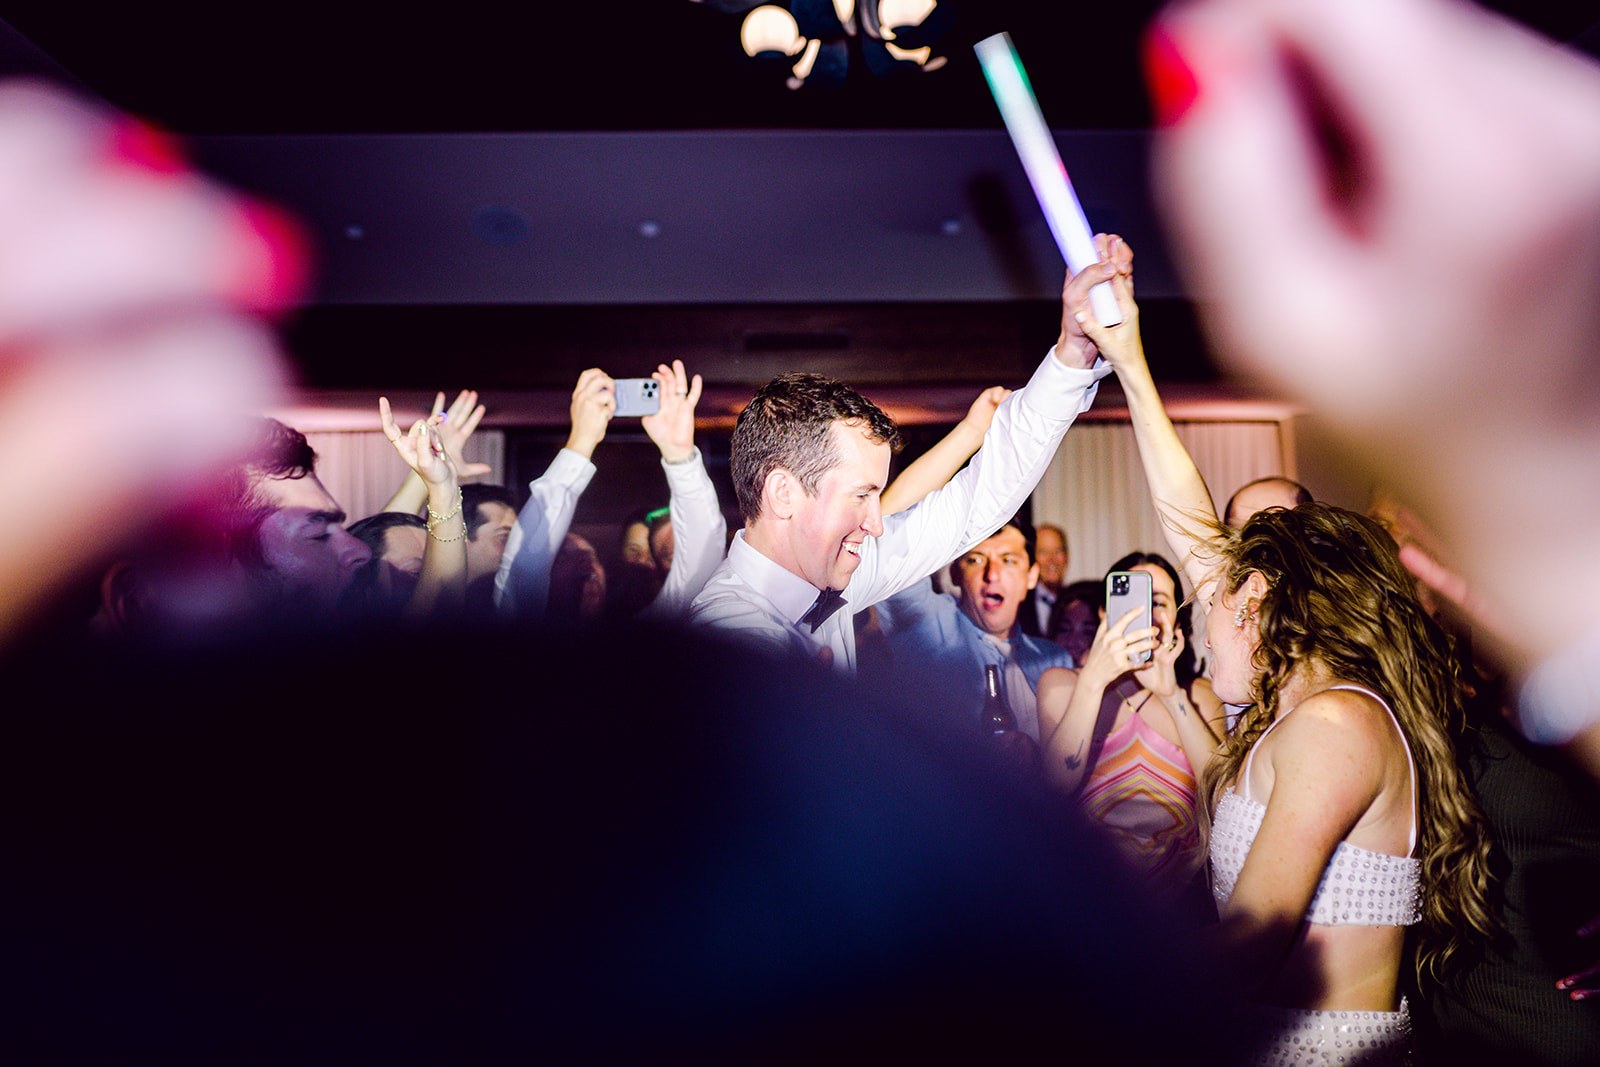 Wild crowd and bride and groom rave dance together at wedding reception of Mayfair House Hotel & Garden, Miami.